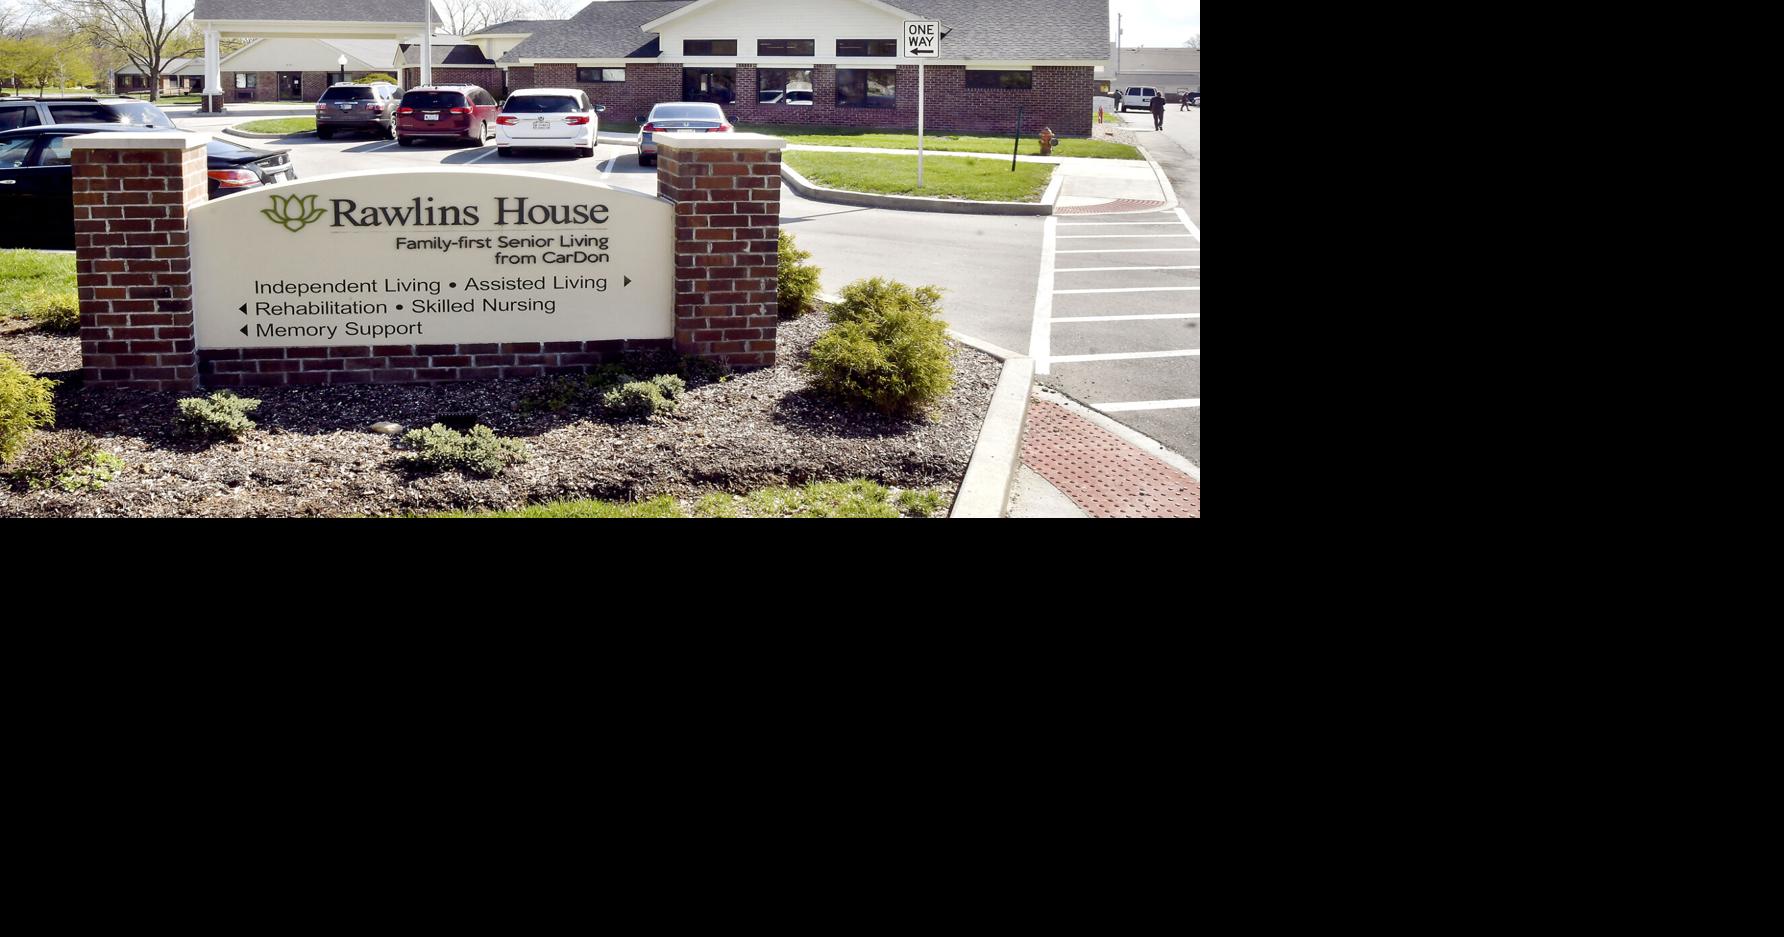 3 Madison County nursing homes receive lowest rating ...